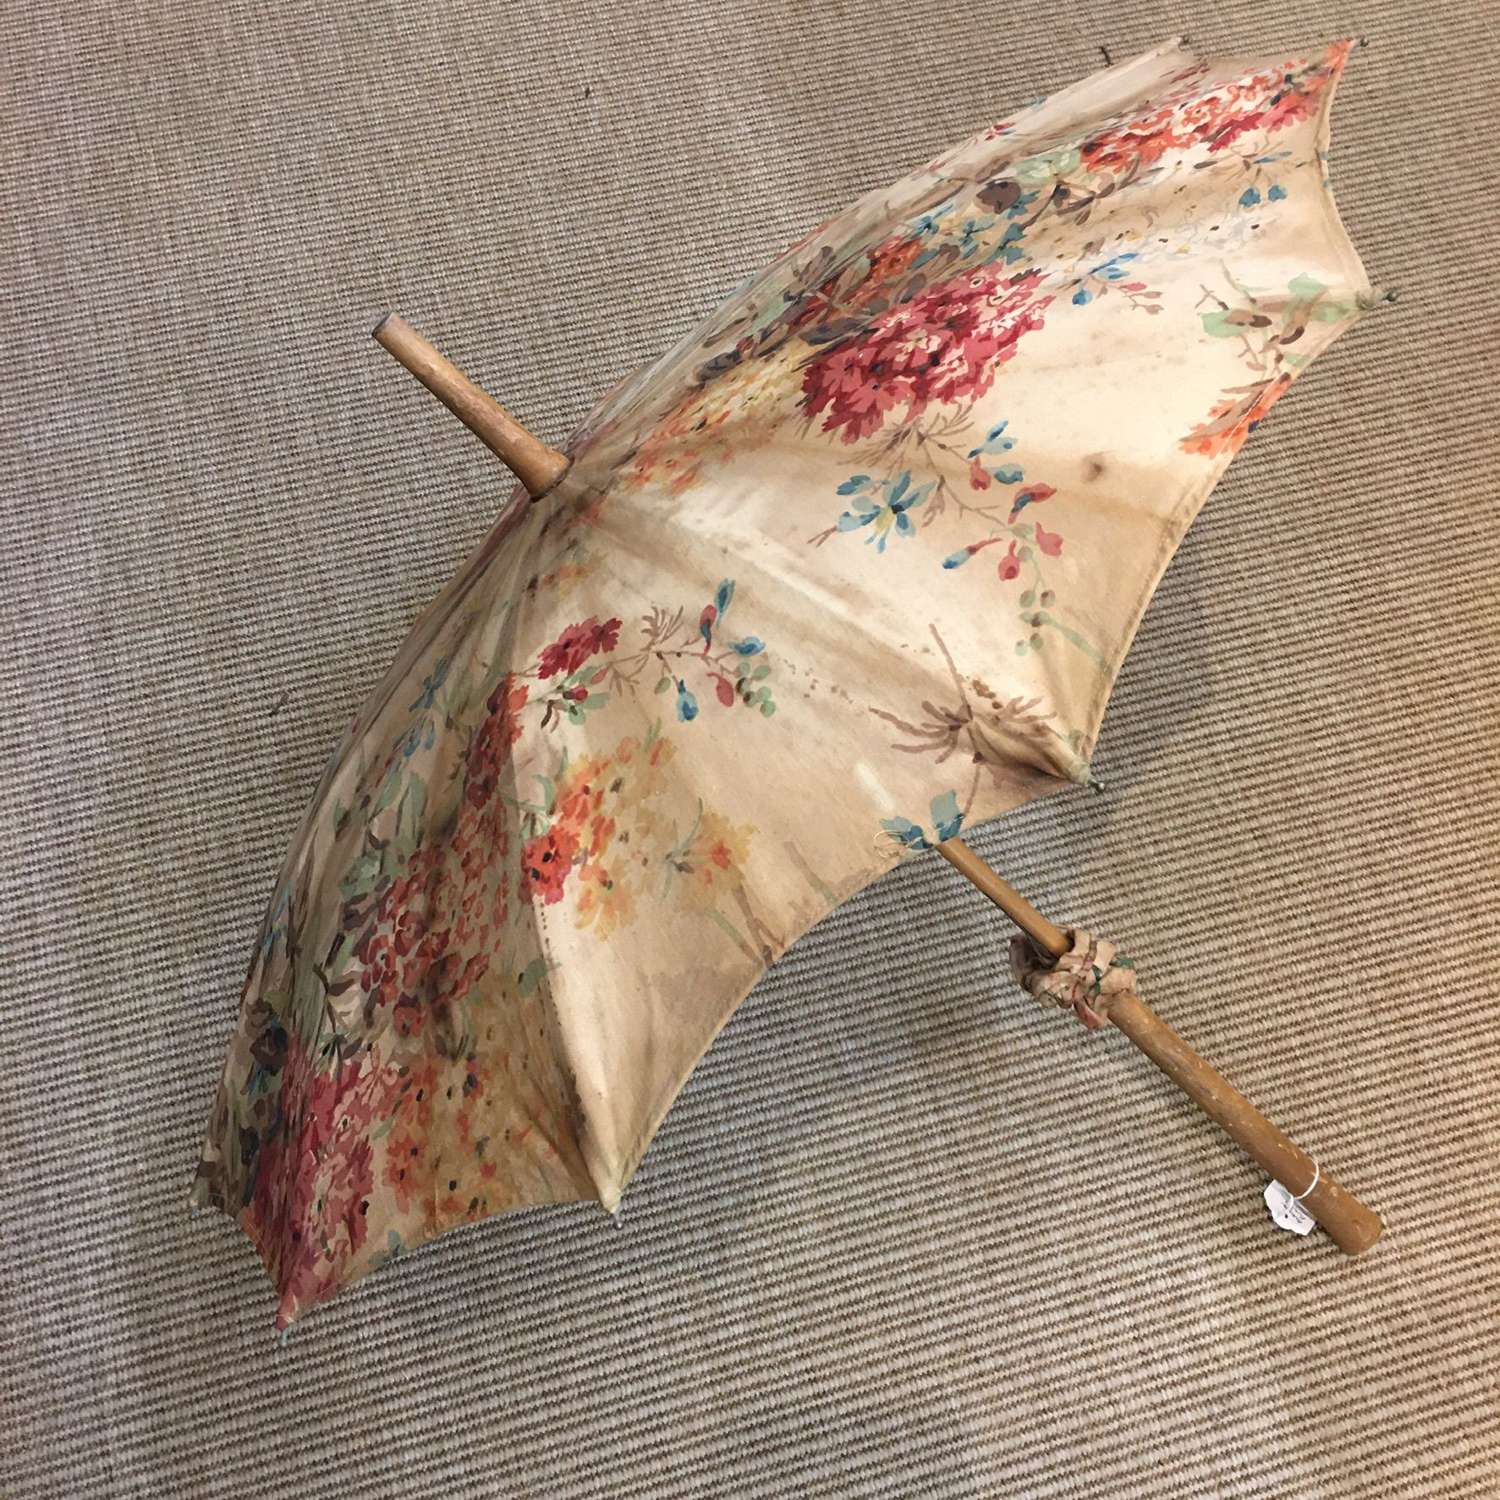 Vintage floral parasole with wooden handle